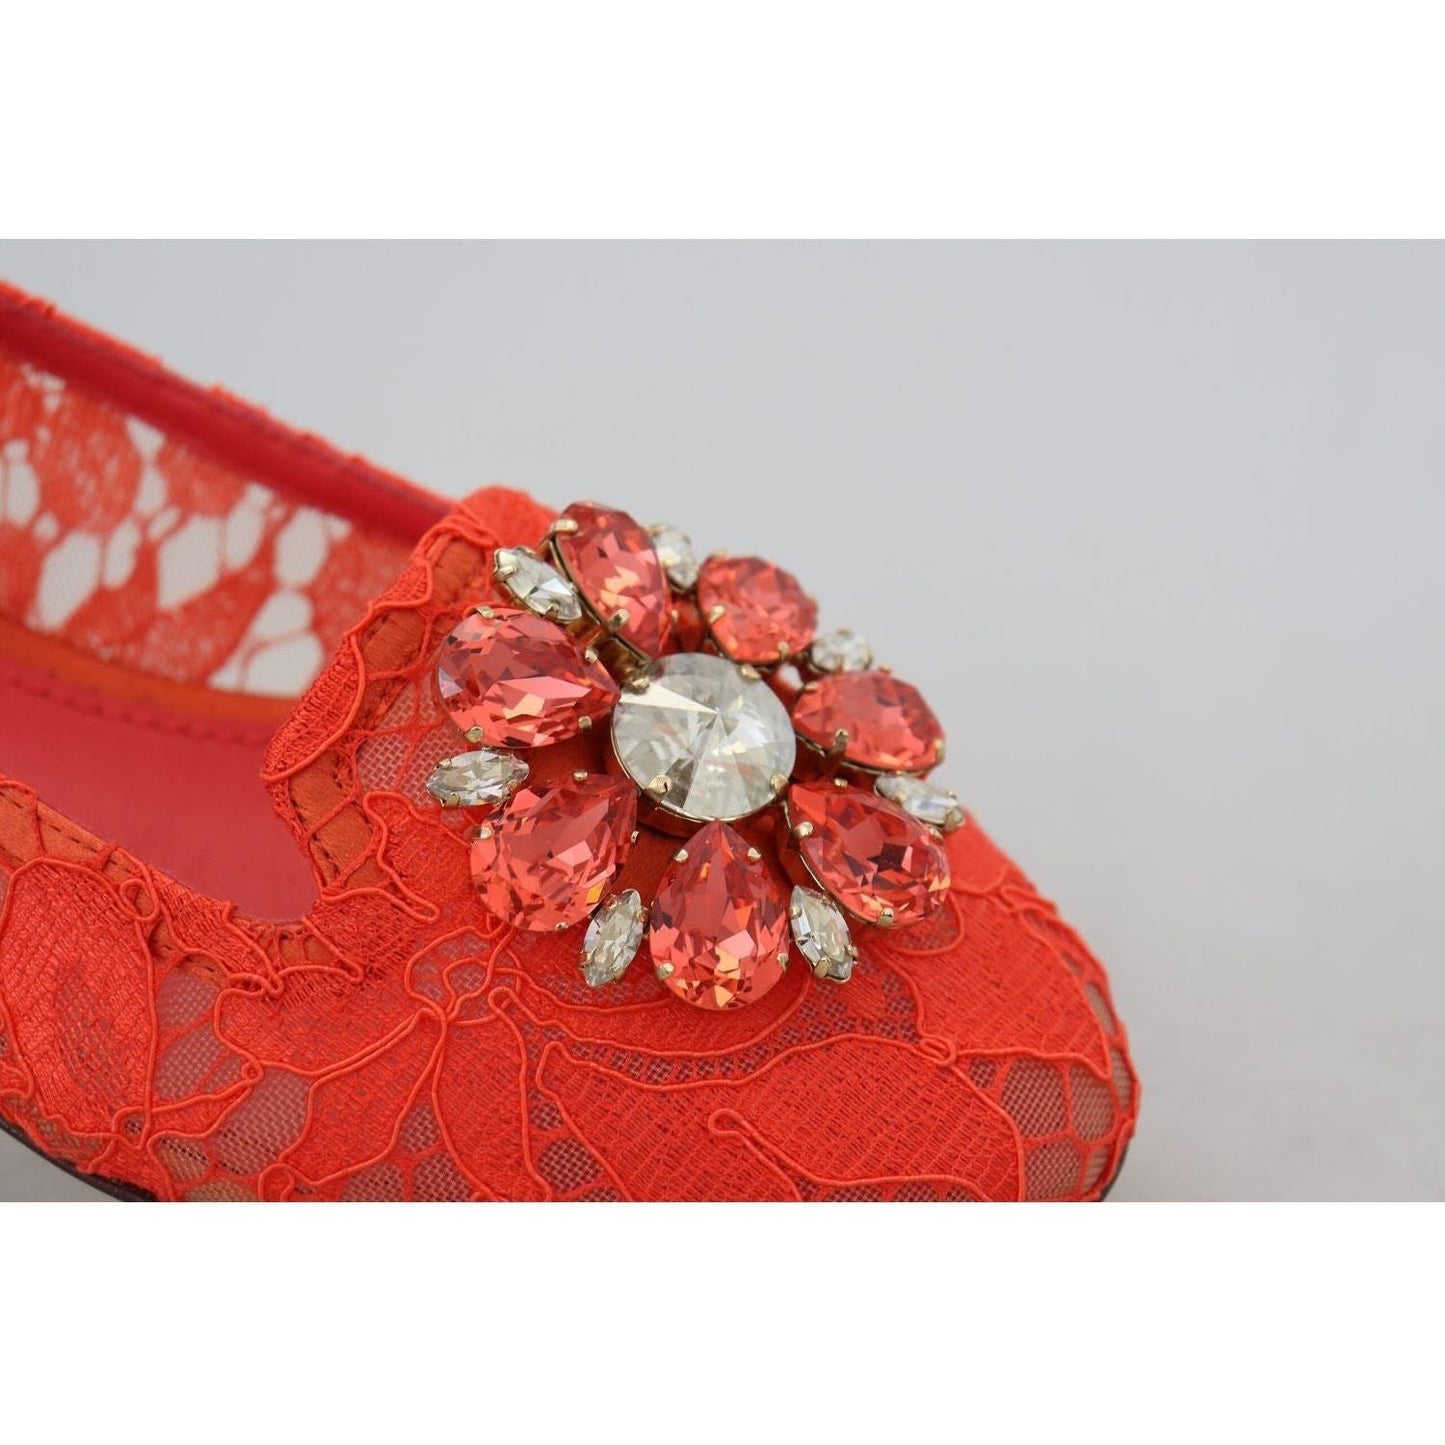 Dolce & Gabbana Elegant Lace Vally Flats in Coral Red red-taormina-lace-crystals-ballet-flats-shoes